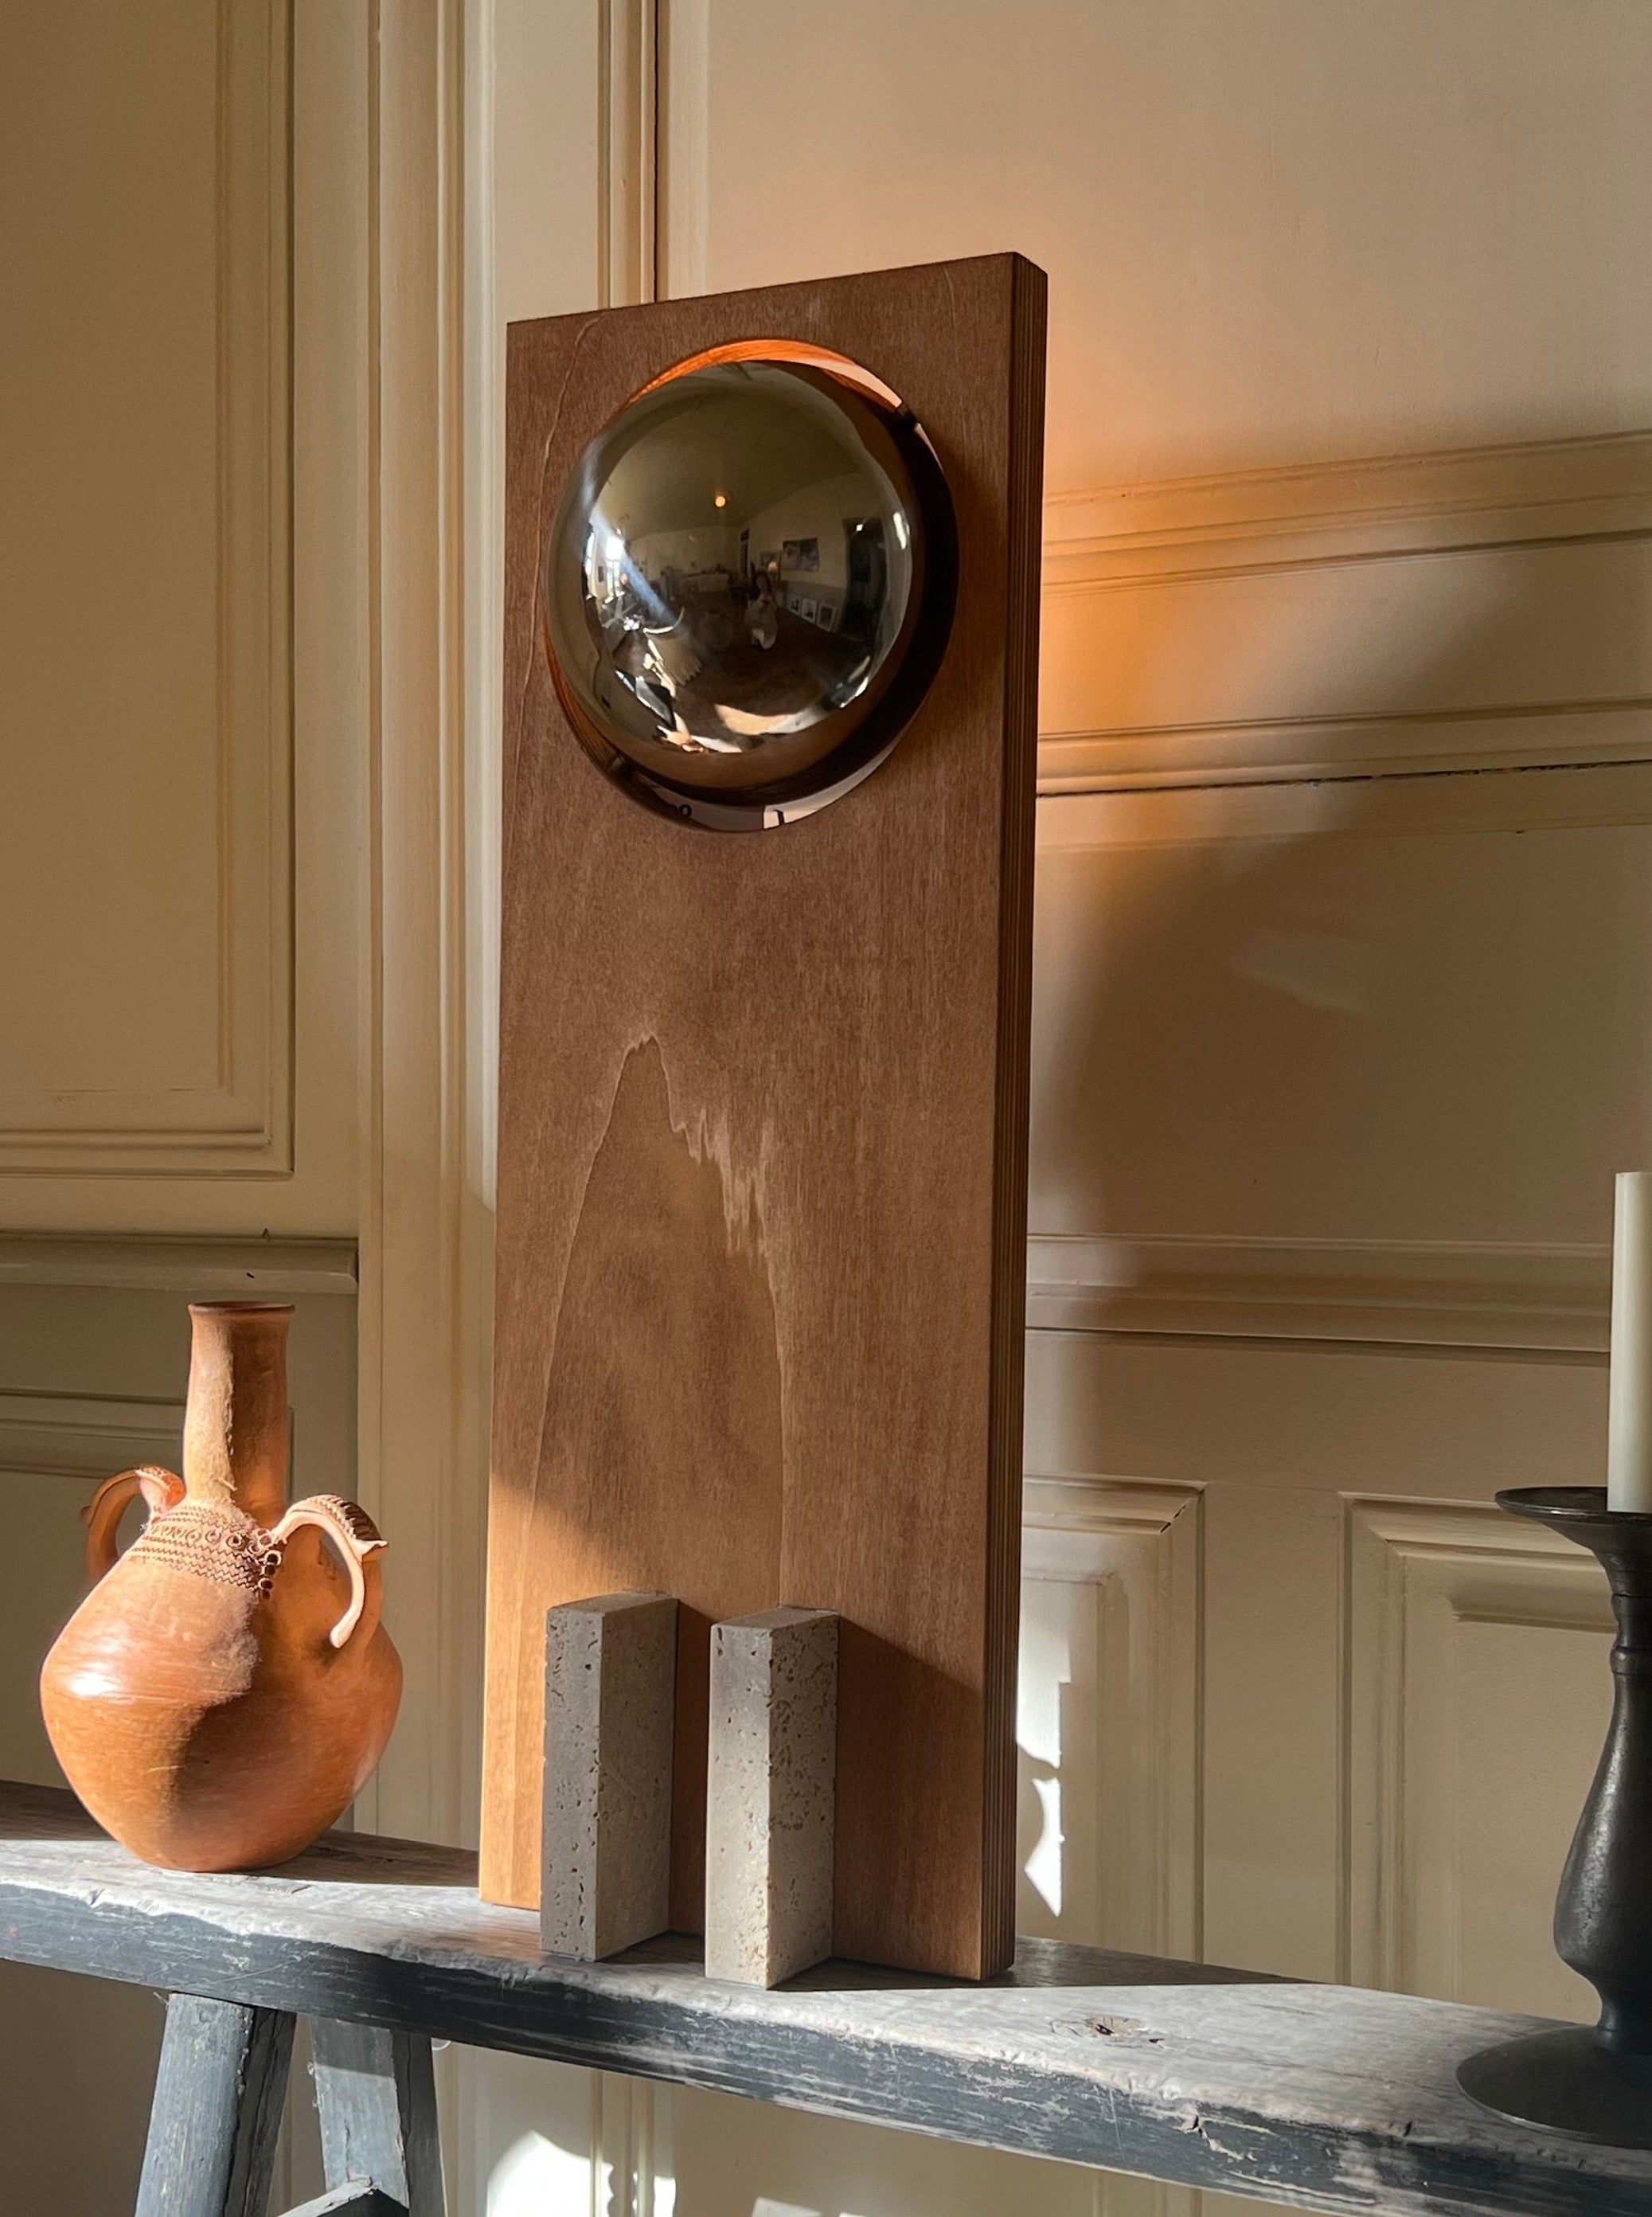 A modern art installation featuring a Galileo 2.3 reflective spherical object mounted on a tall wooden panel. Beside it, on a gray shelf, sits a rustic clay pot and a simple candlestick. Soft lighting from a Edoardo Lietti Studio.